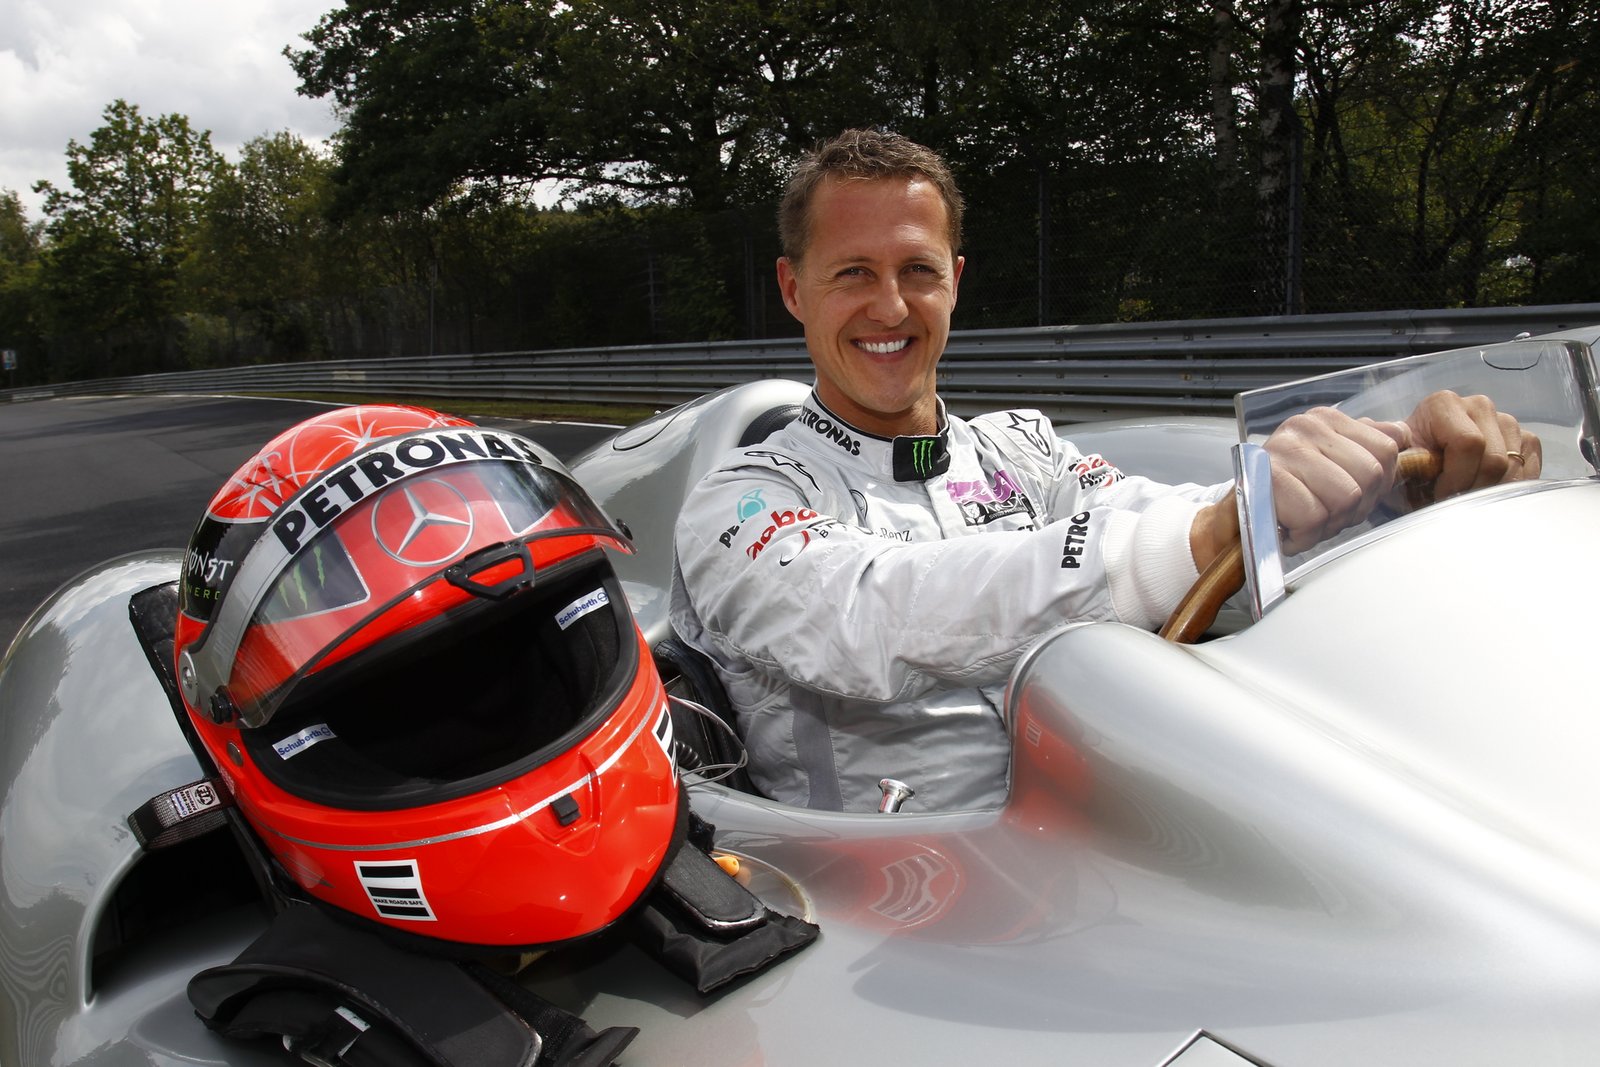 Fotoshooting Mercedes-Benz Silberpfeile, Nuerburgring Nordschleife, 21.07.2011
Michael Schumacher, Mercedes-Benz W196 Stromlinie
NZH 04May13 - DRT 10May13 - WGM 15Nov13 - WMM 15Nov13 -
HBK 15Nov13 - NZH 04Nov14 -  WGP 29Dec14 - HBG 29Dec14 - 
WAG 29Dec14 - BTG 29Dec14 - NAG 29Dec14 - 
NZH 31Jan15 -
NZH 19Dec18 - Michael Schumacher is hidden from the world but is not bed-ridden nor existing on tubes but is receiving extensive nursing and therapy care, costing more than $92,000 a week. Photo / AP

WGP 06Mar19 -
BTG 06Mar19 -